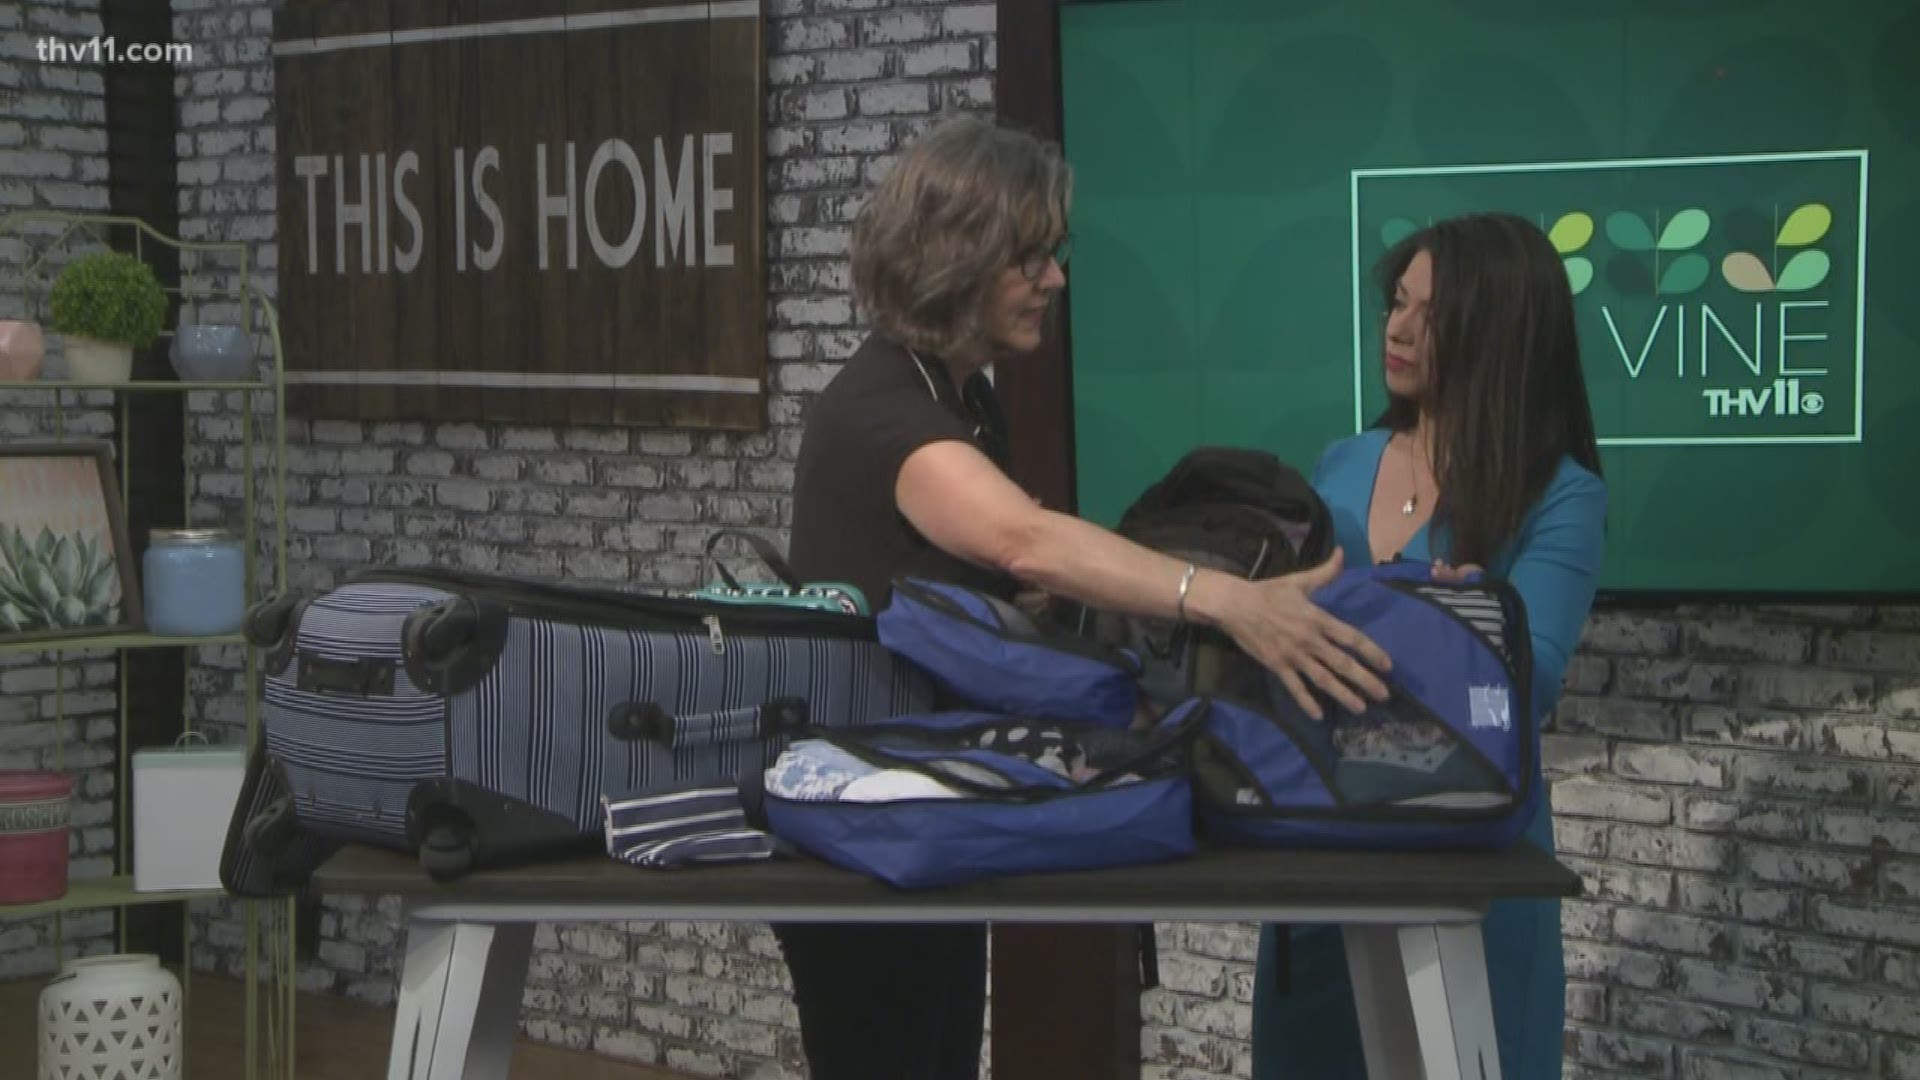 Sue Fehlberg with TidyNest of Little Rock showed us how to use the KonMari method for packing.